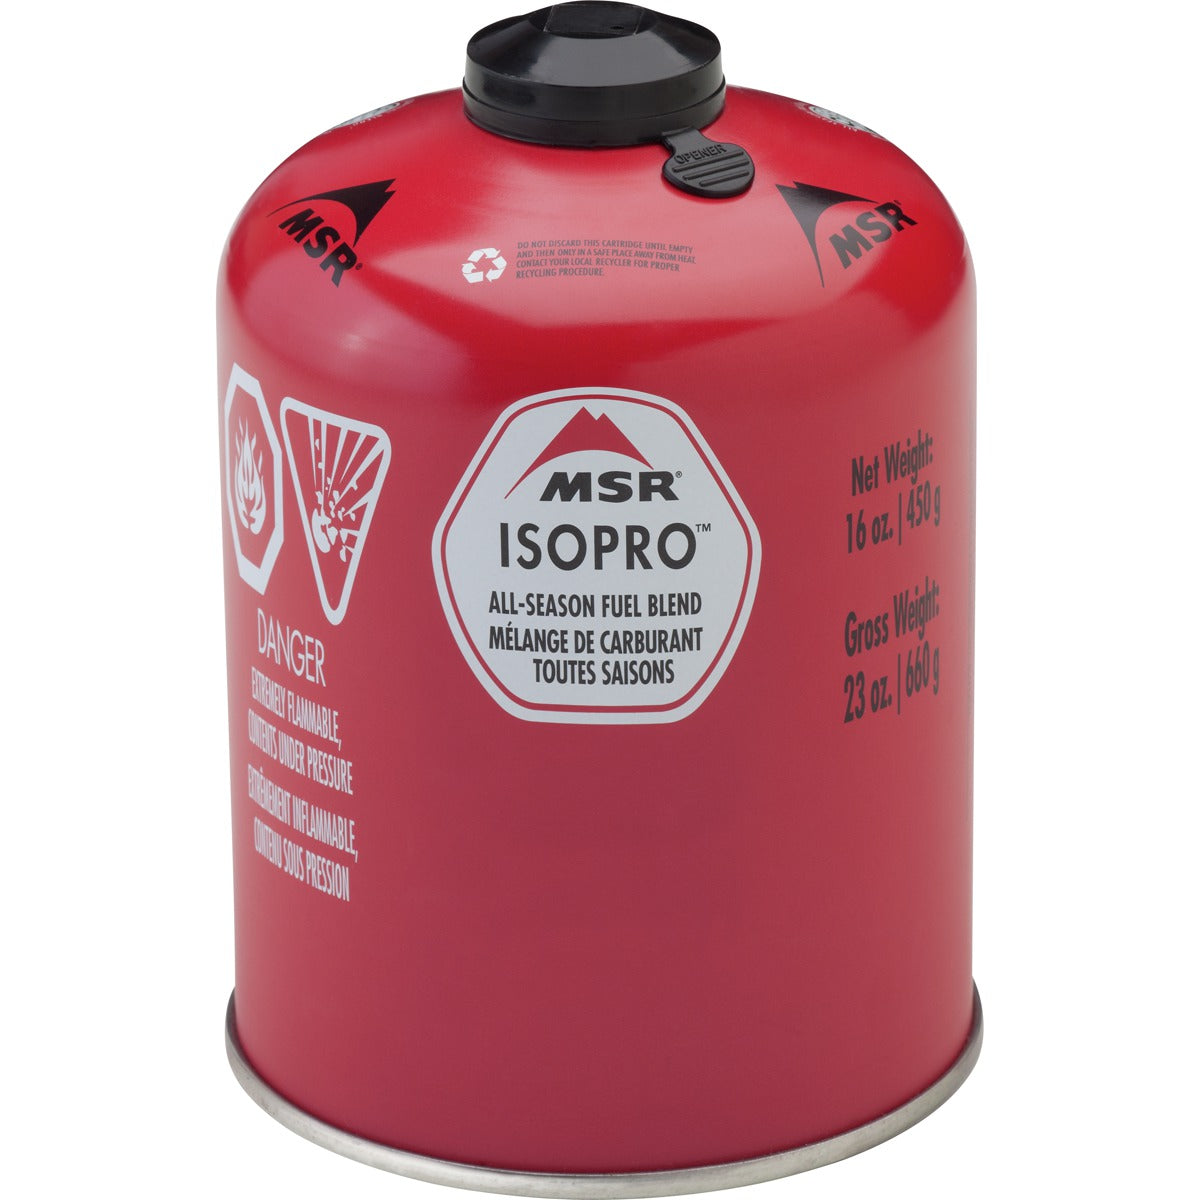 msr isopro gas cannister 450g